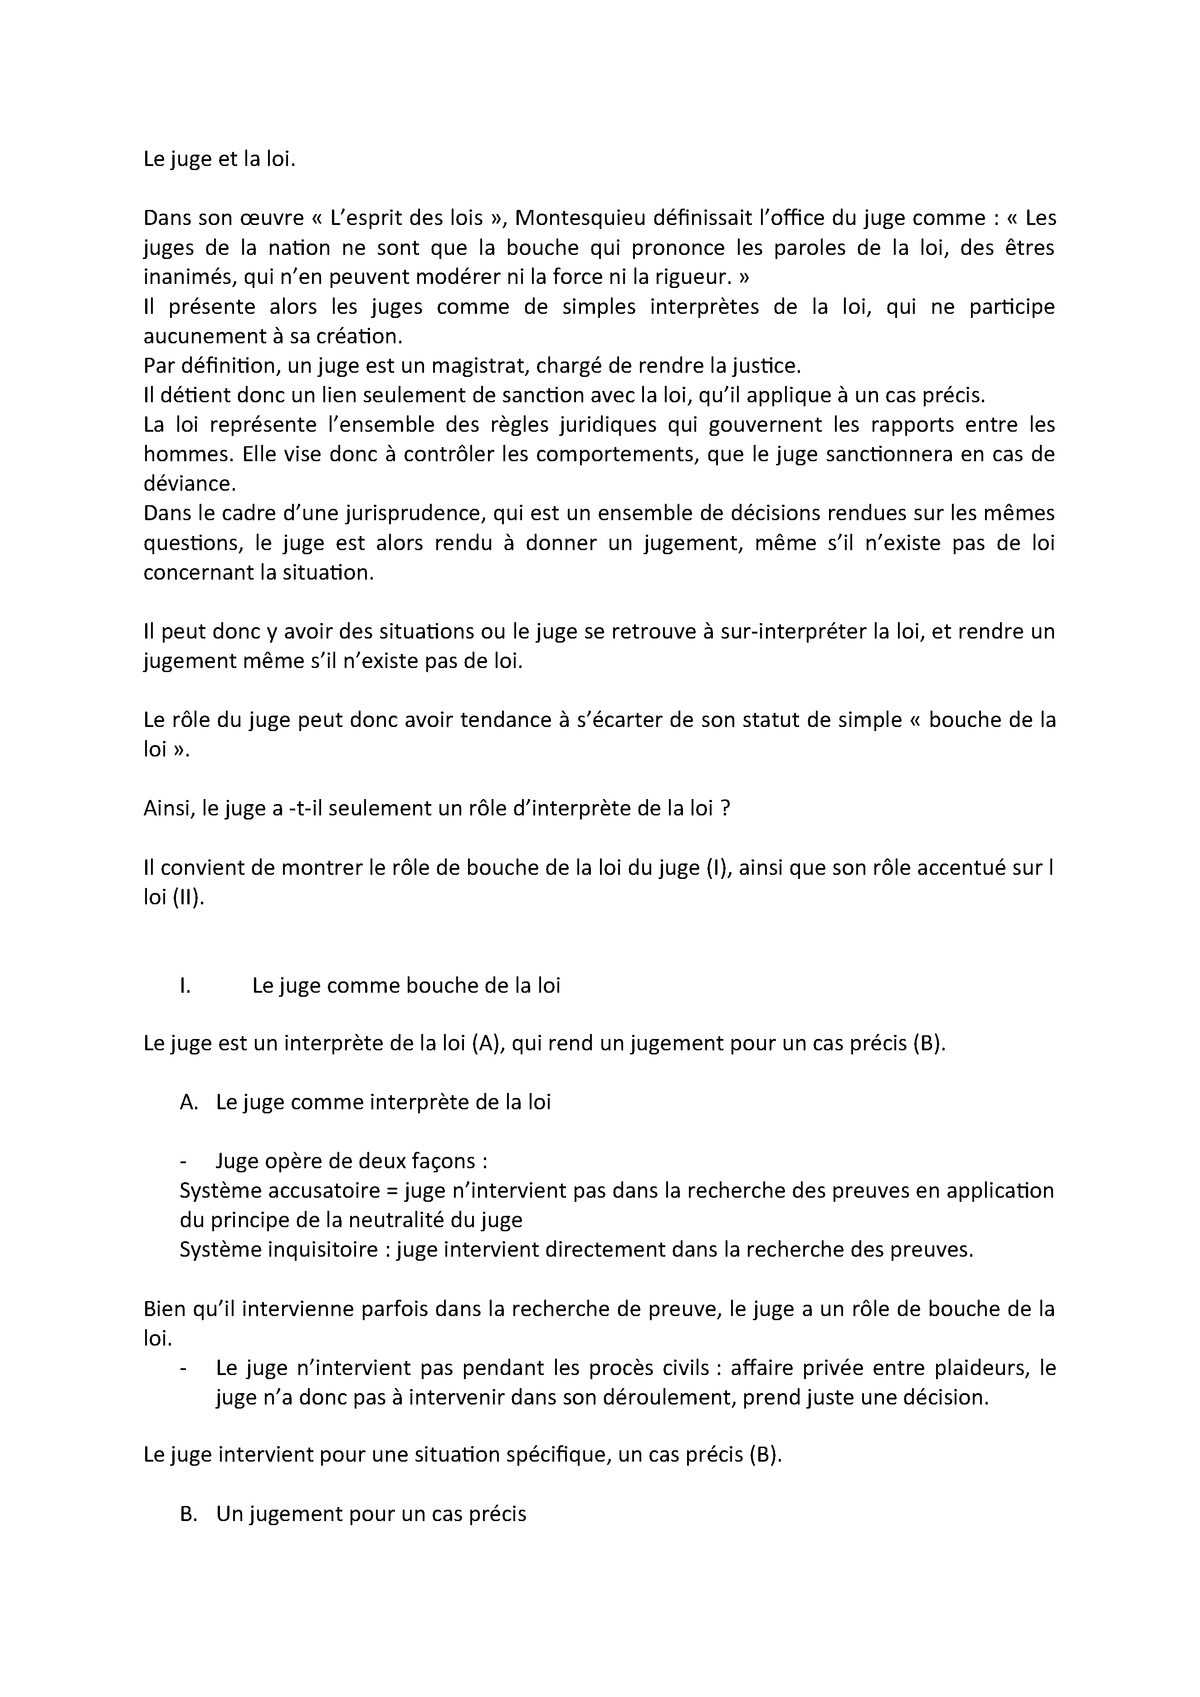 Essay on good student for class 1